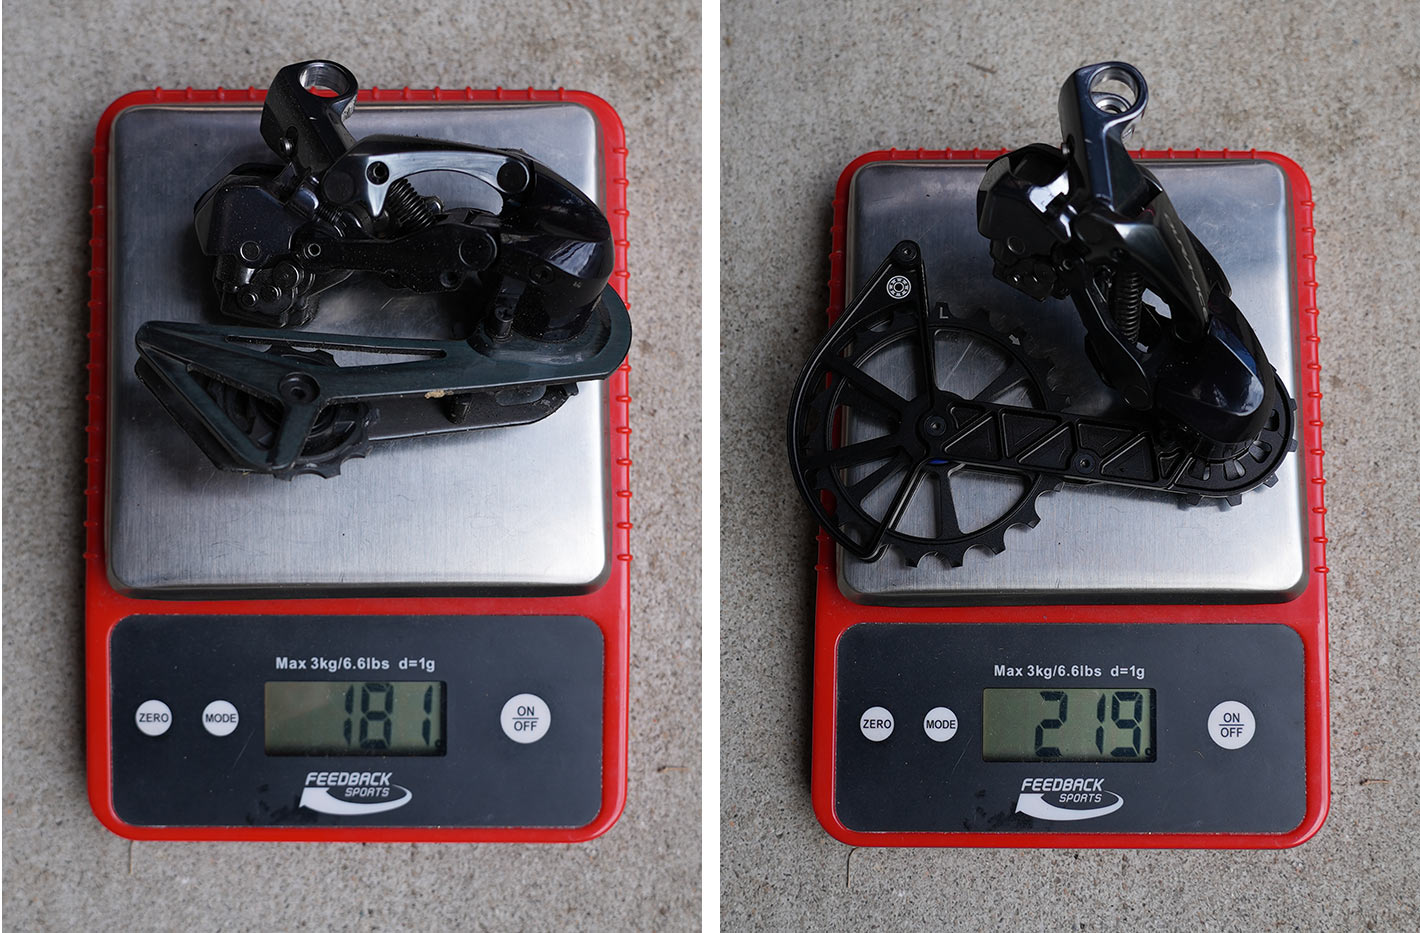 actual weight of kogel colossus os pulley upgrade on a rear derailleur shown on the scale